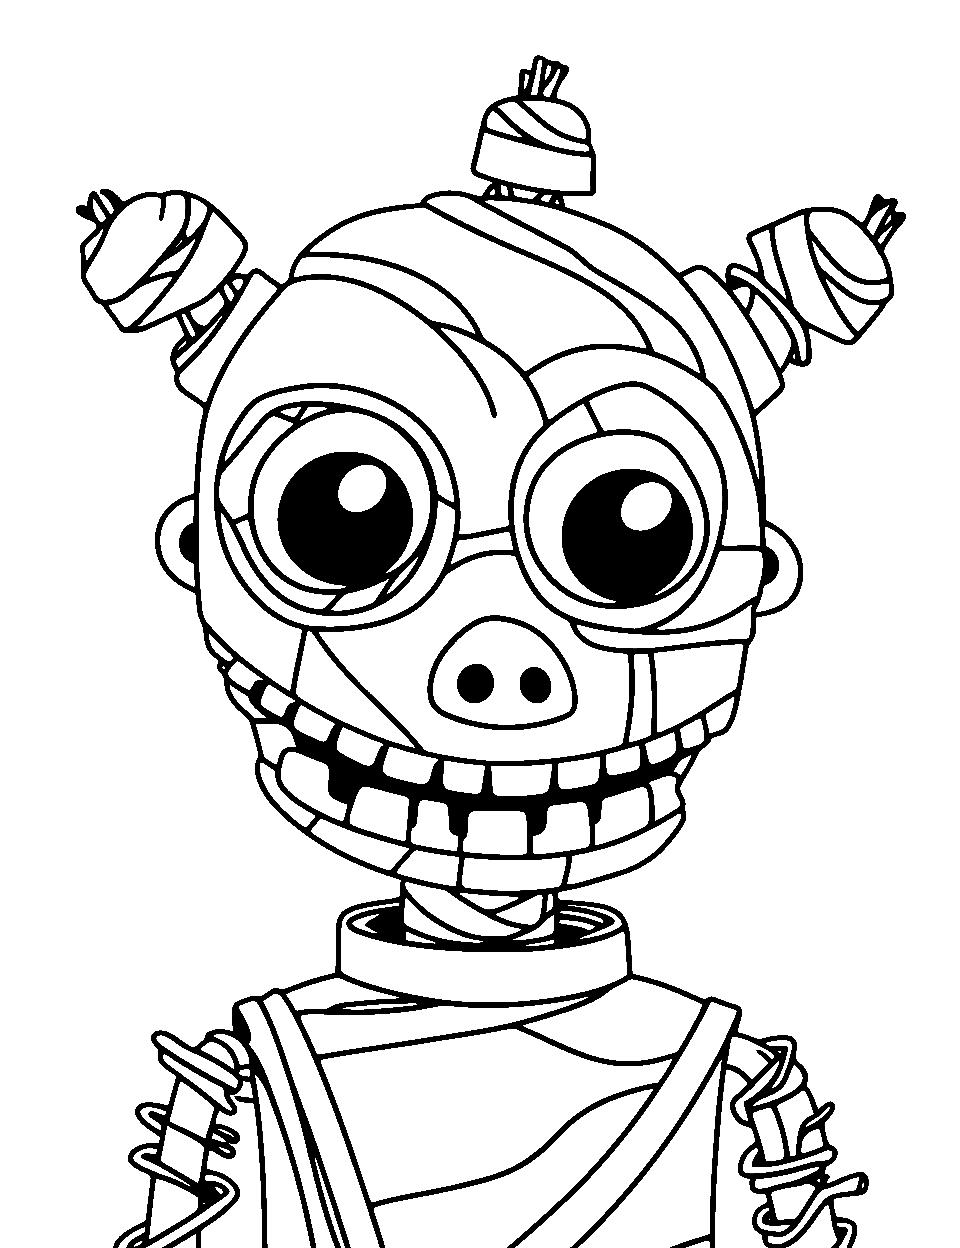 Twisted Stare Five Nights at Freddys Coloring Page - A twisted animatronic staring intensely.